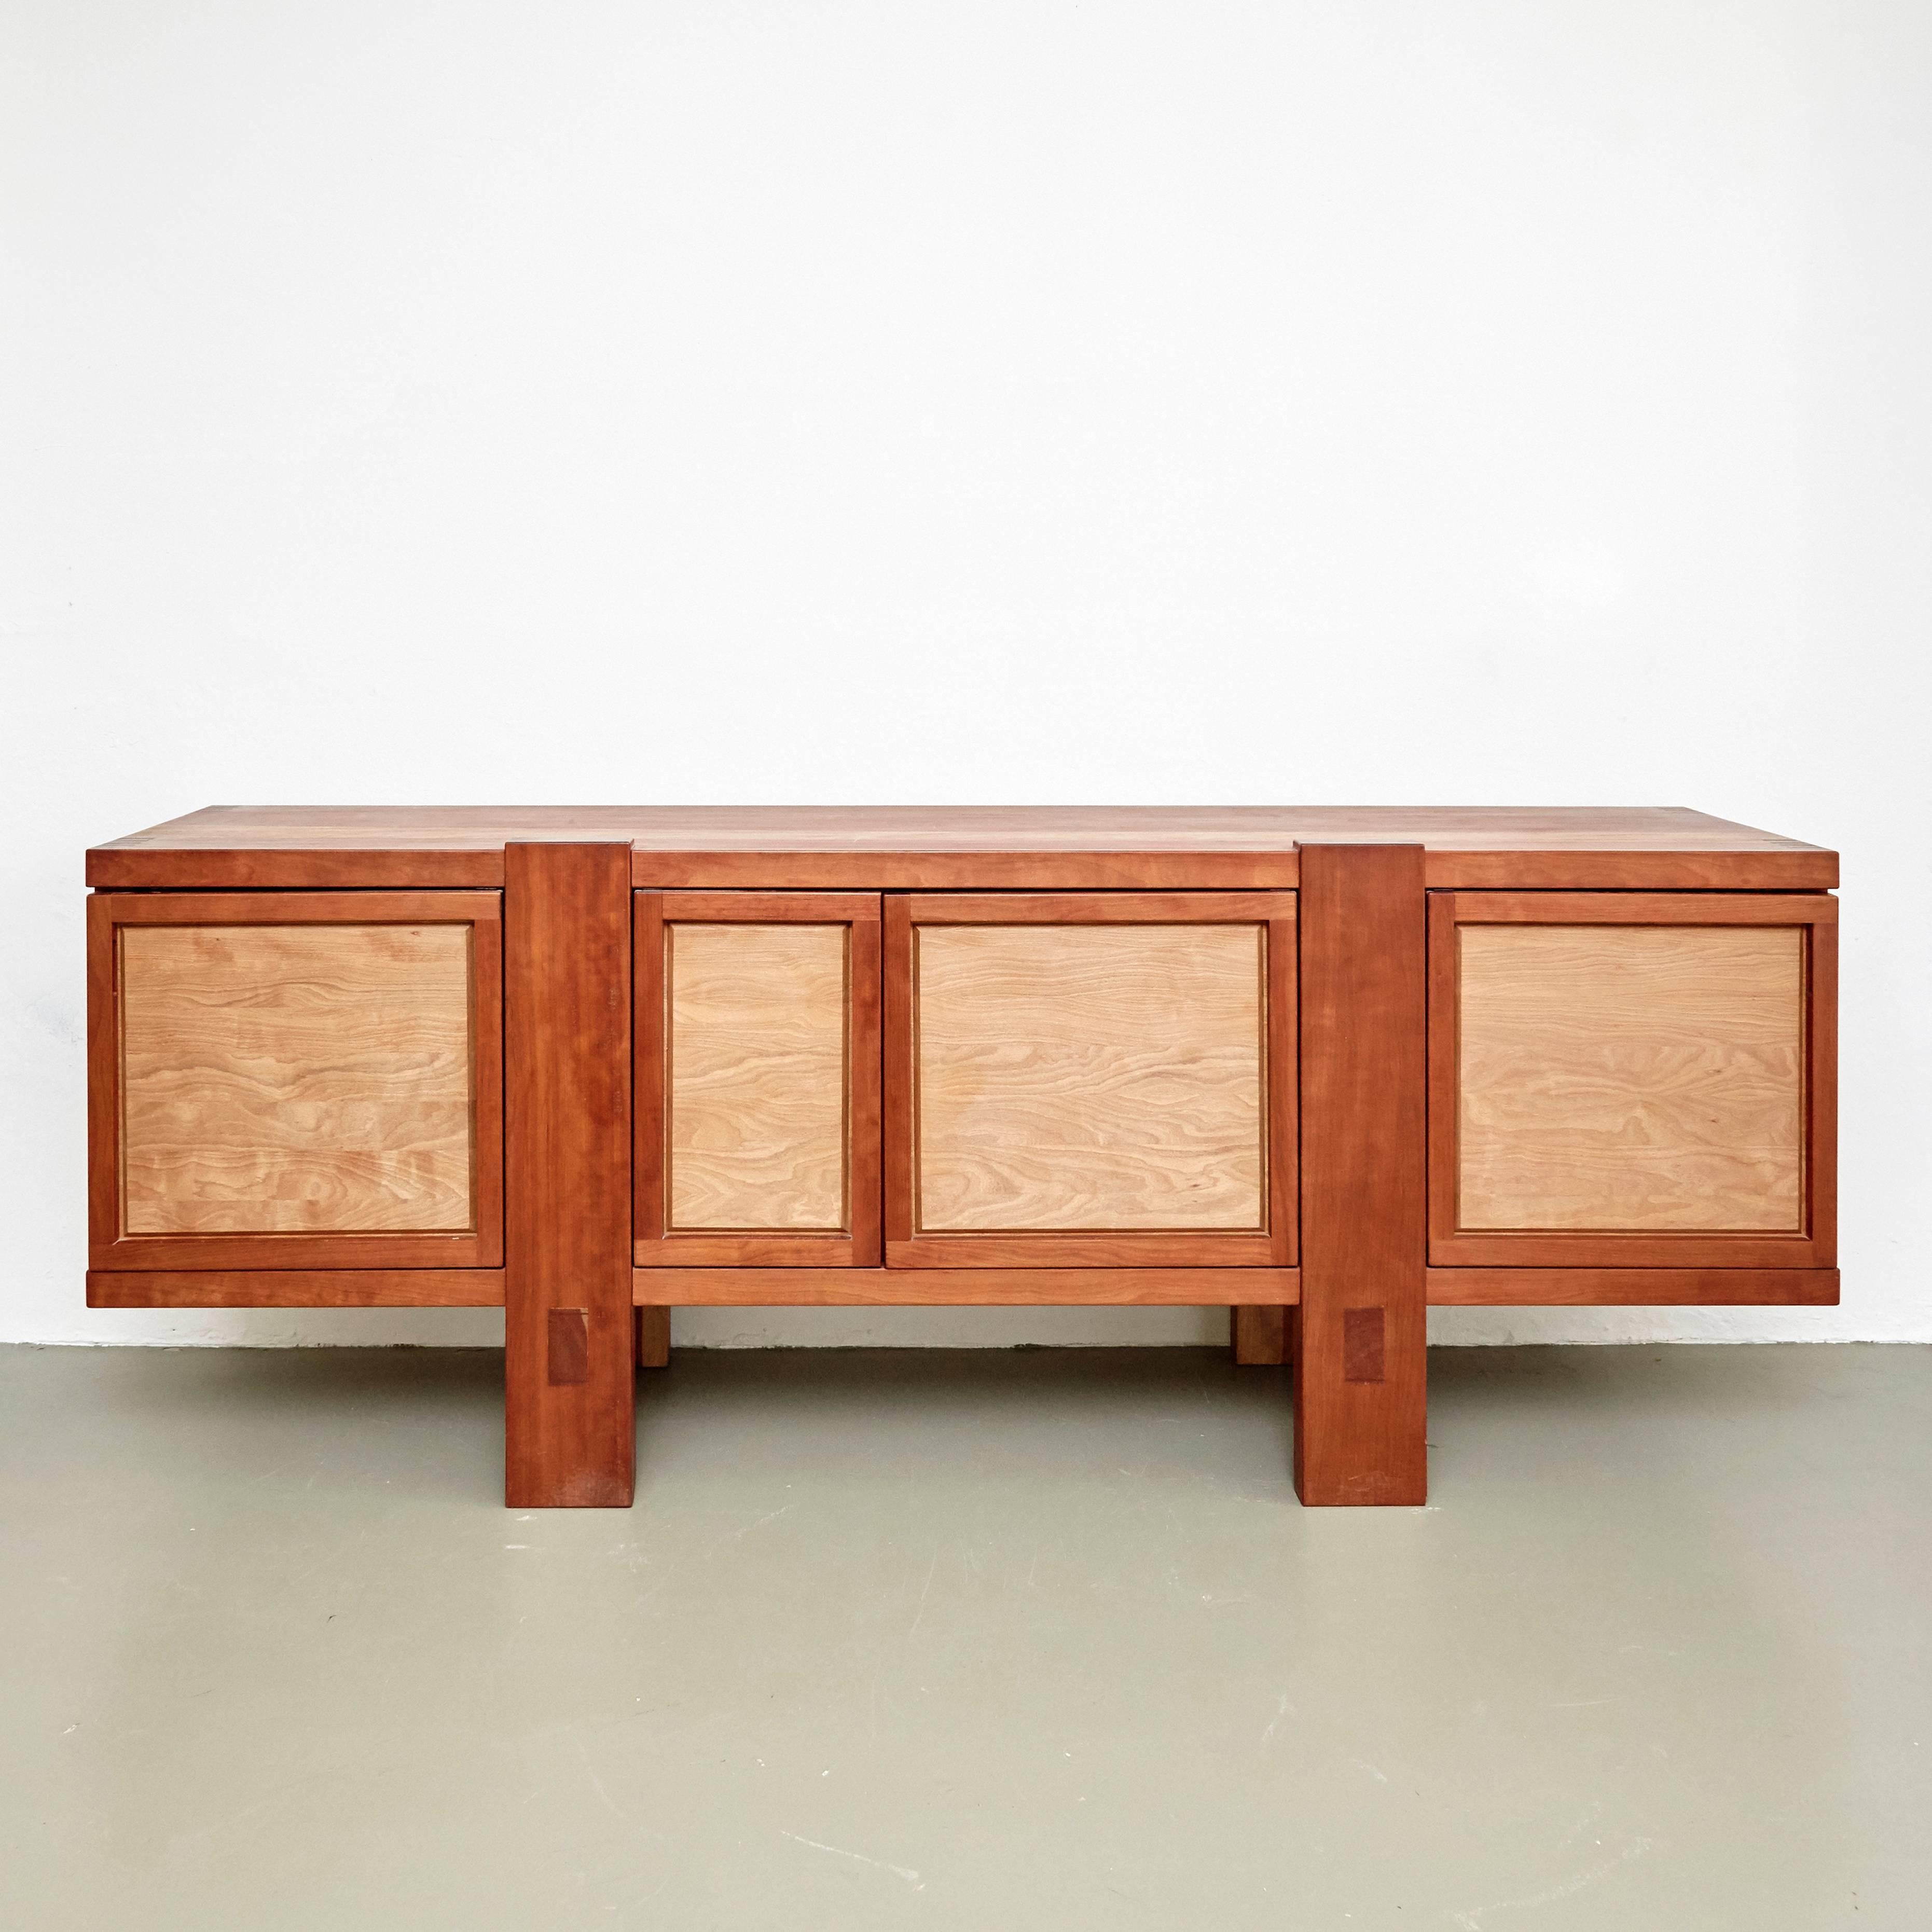 Large cabinet R16A designed by Pierre Chapo in the 1960s.
Manufactured by Pierre Chapo in France, circa 1960.

In original condition, with wear consistent with age and use, preserving a beautiful patina.
Some losses on the legs, as you see on the